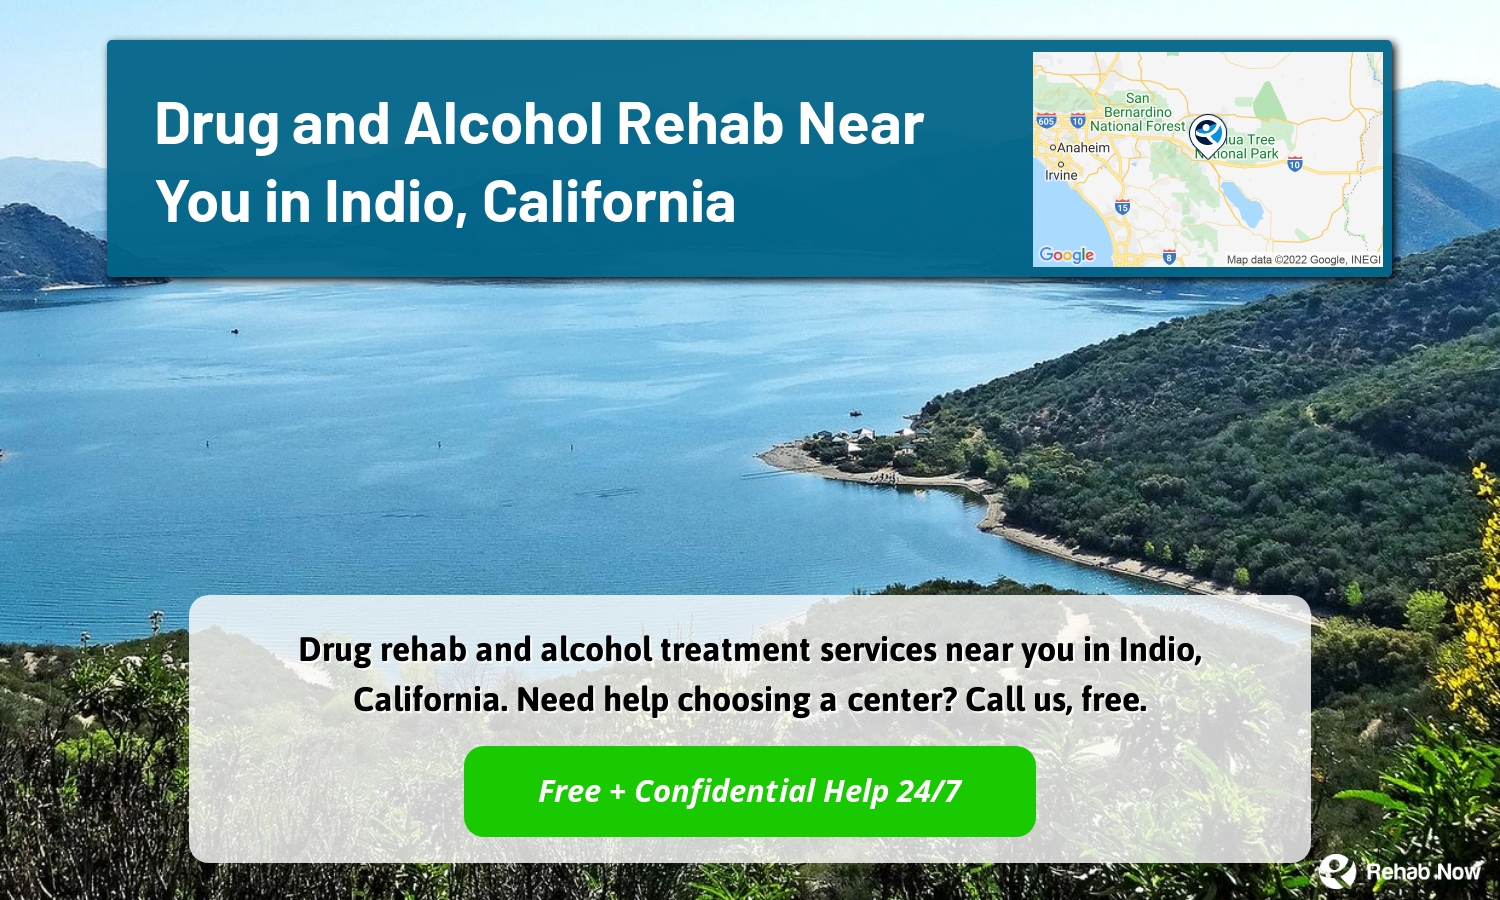 Drug rehab and alcohol treatment services near you in Indio, California. Need help choosing a center? Call us, free.